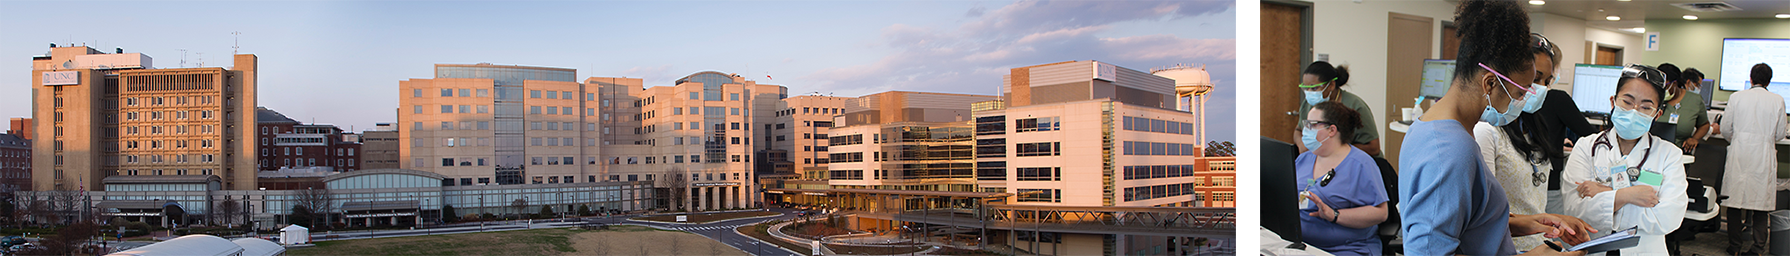 Landscape photo of UNC School of Medicine buildings and students